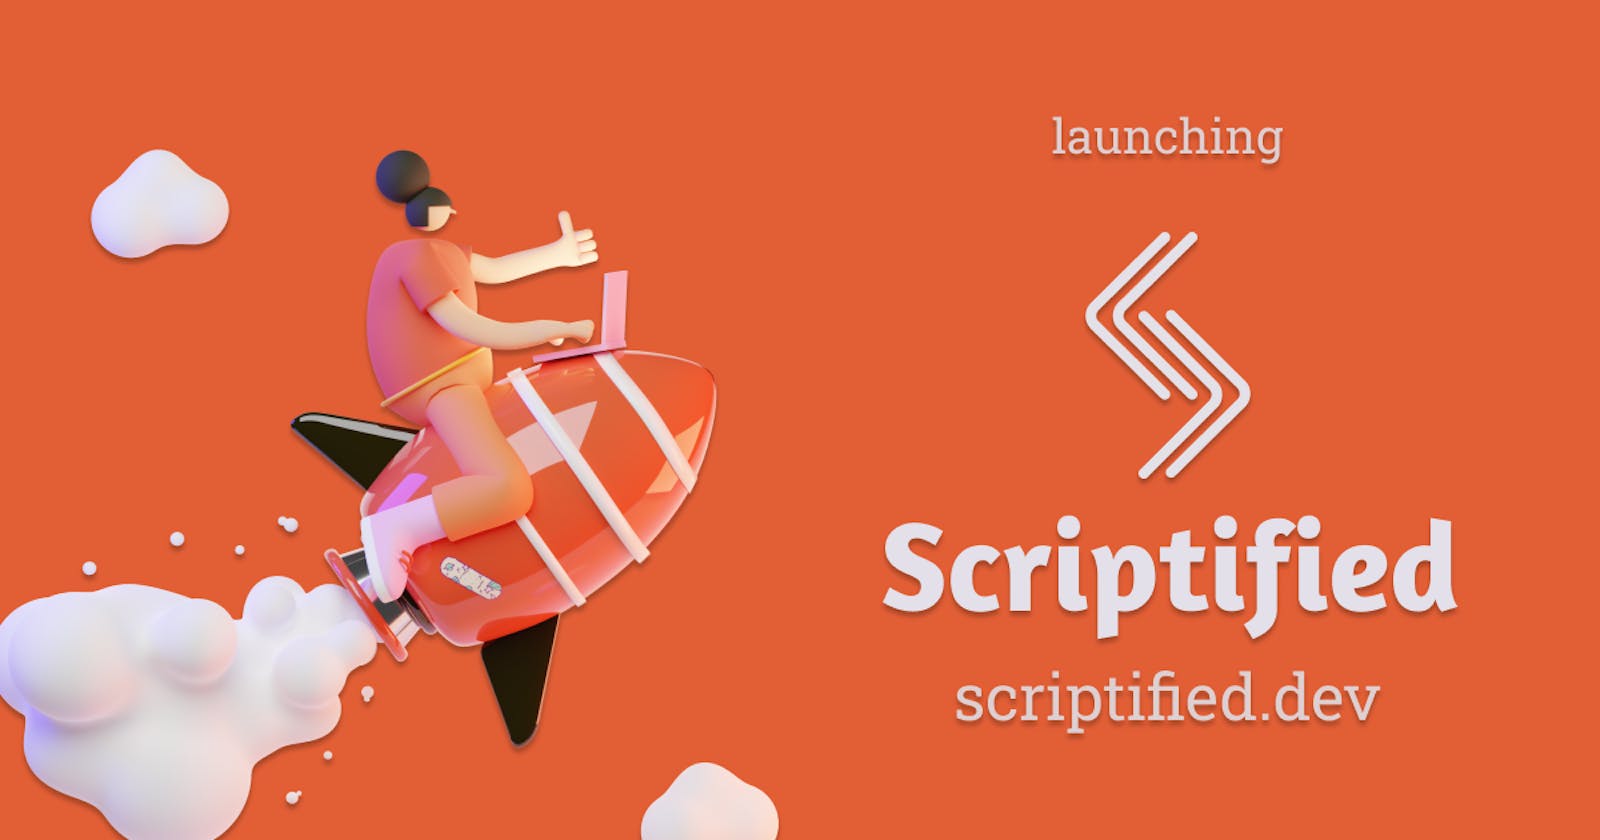 How An App Crash Made Us Build Another App - Story of Scriptified